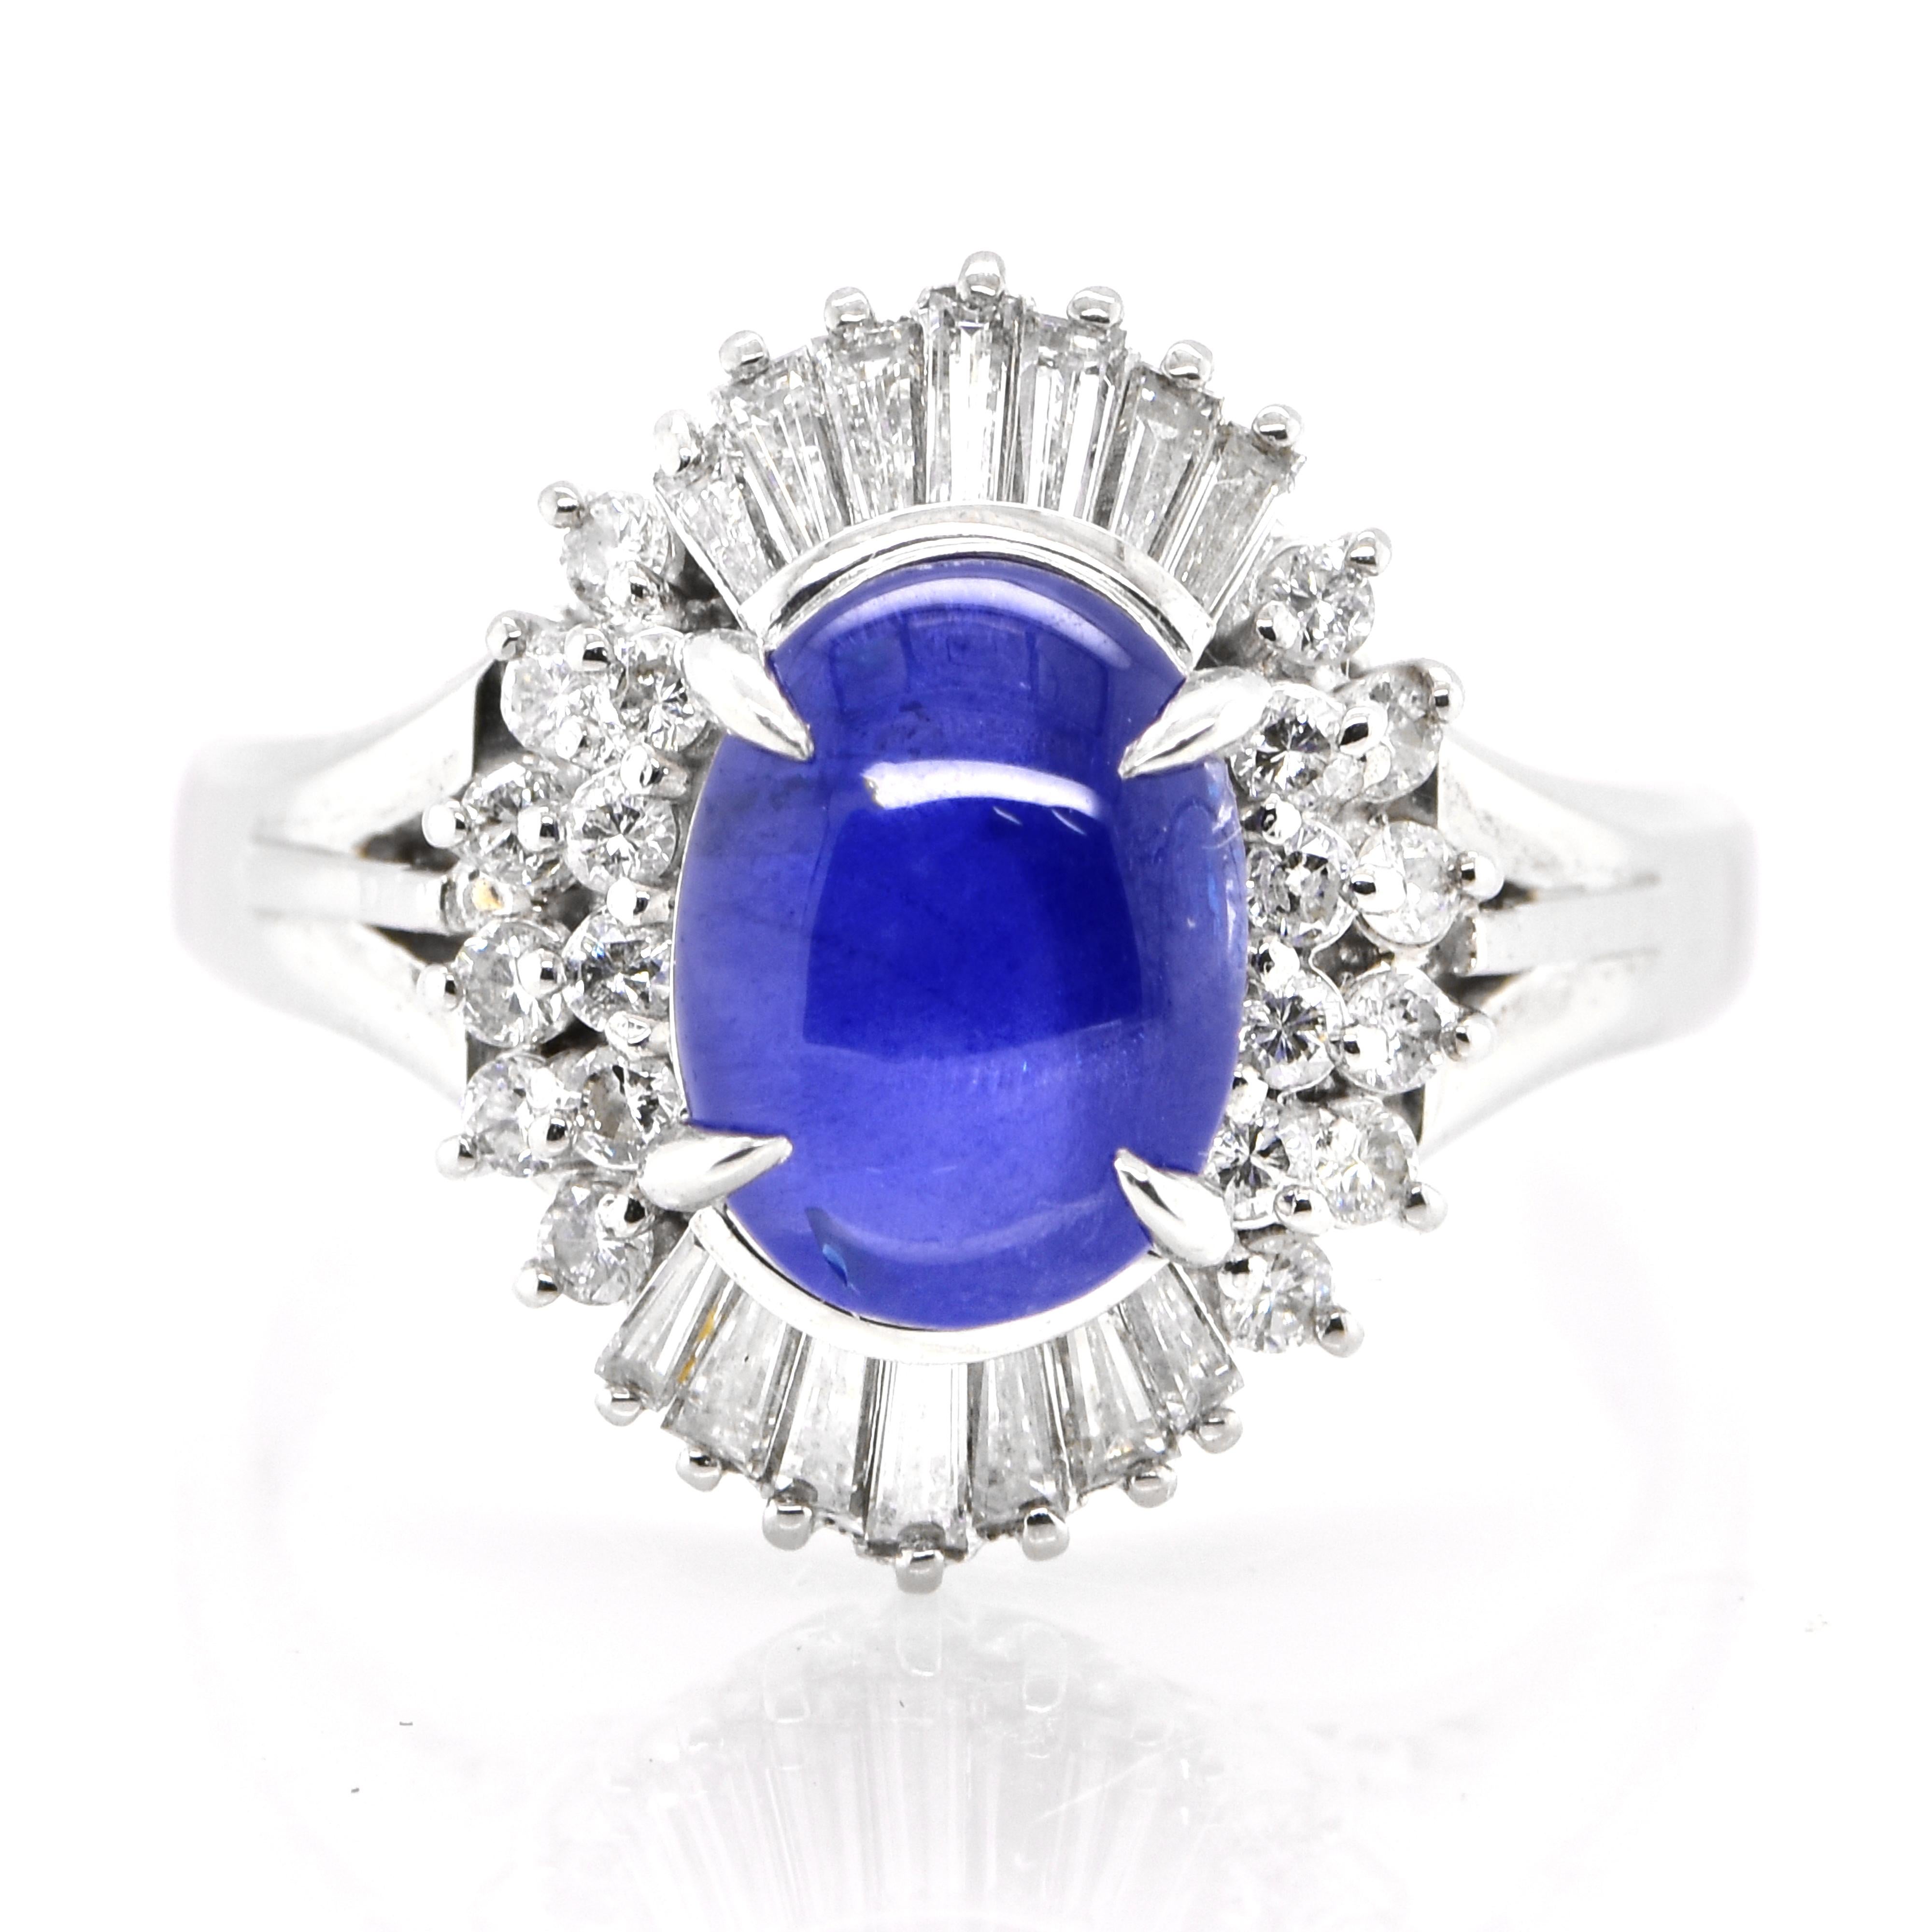 A beautiful ring featuring 3.305 Carat Natural Blue Star Sapphire and Diamond Accents set in Platinum. Sapphires have extraordinary durability - they excel in hardness as well as toughness and durability making them very popular in jewelry.